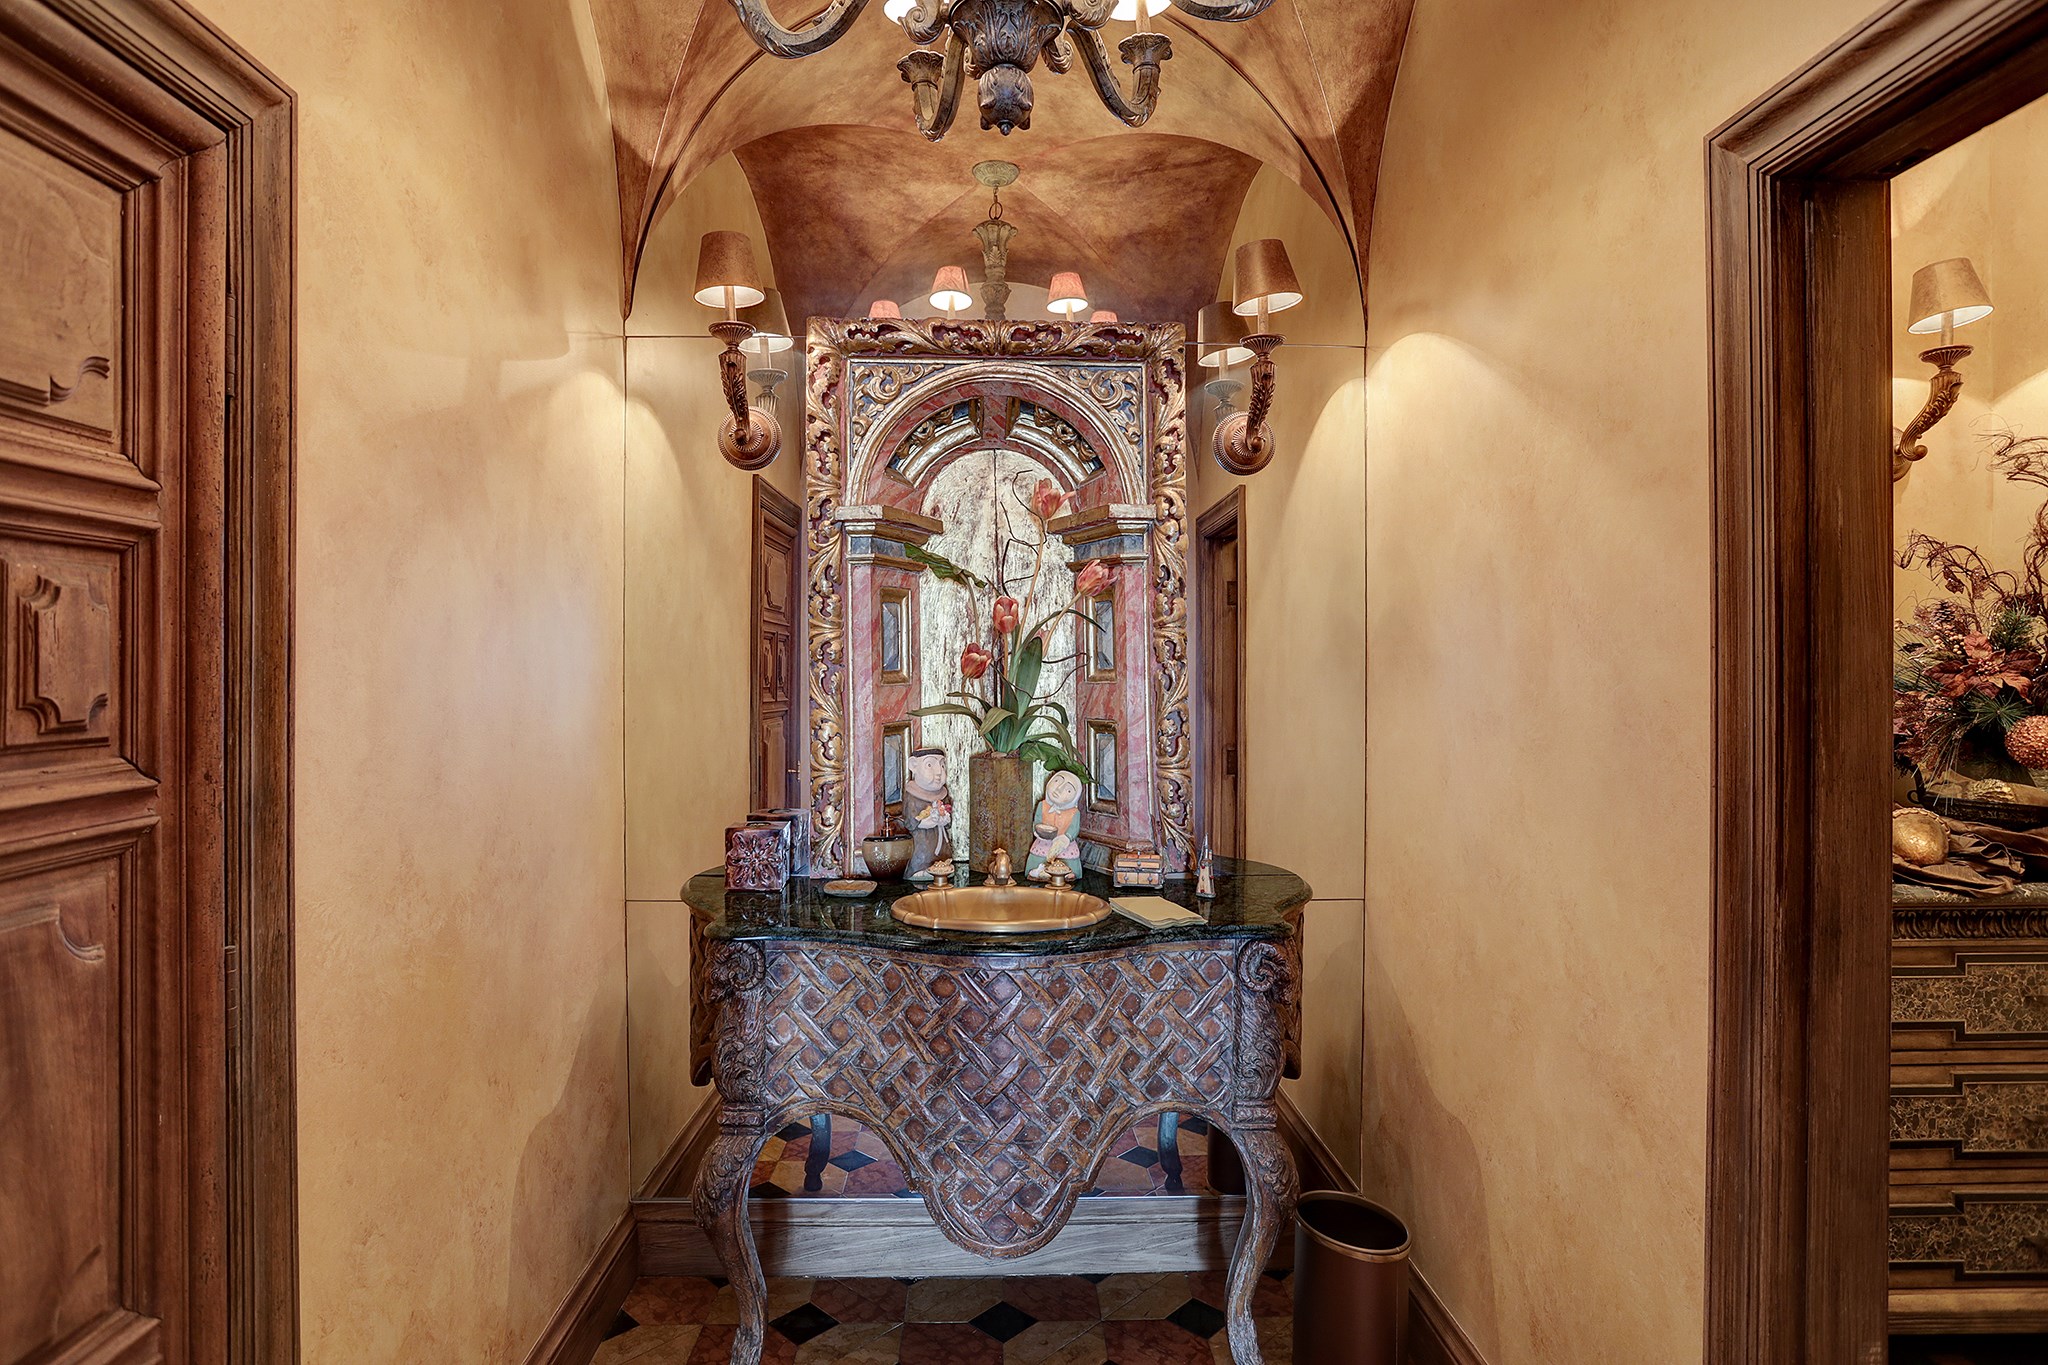 The Formal Powder Room is located off of the Foyer.  This is a photo of the Ante Room with variegated travertine tile floor with stone inlay and an antique console table with cabriole legs, granite deck and fluted sink.